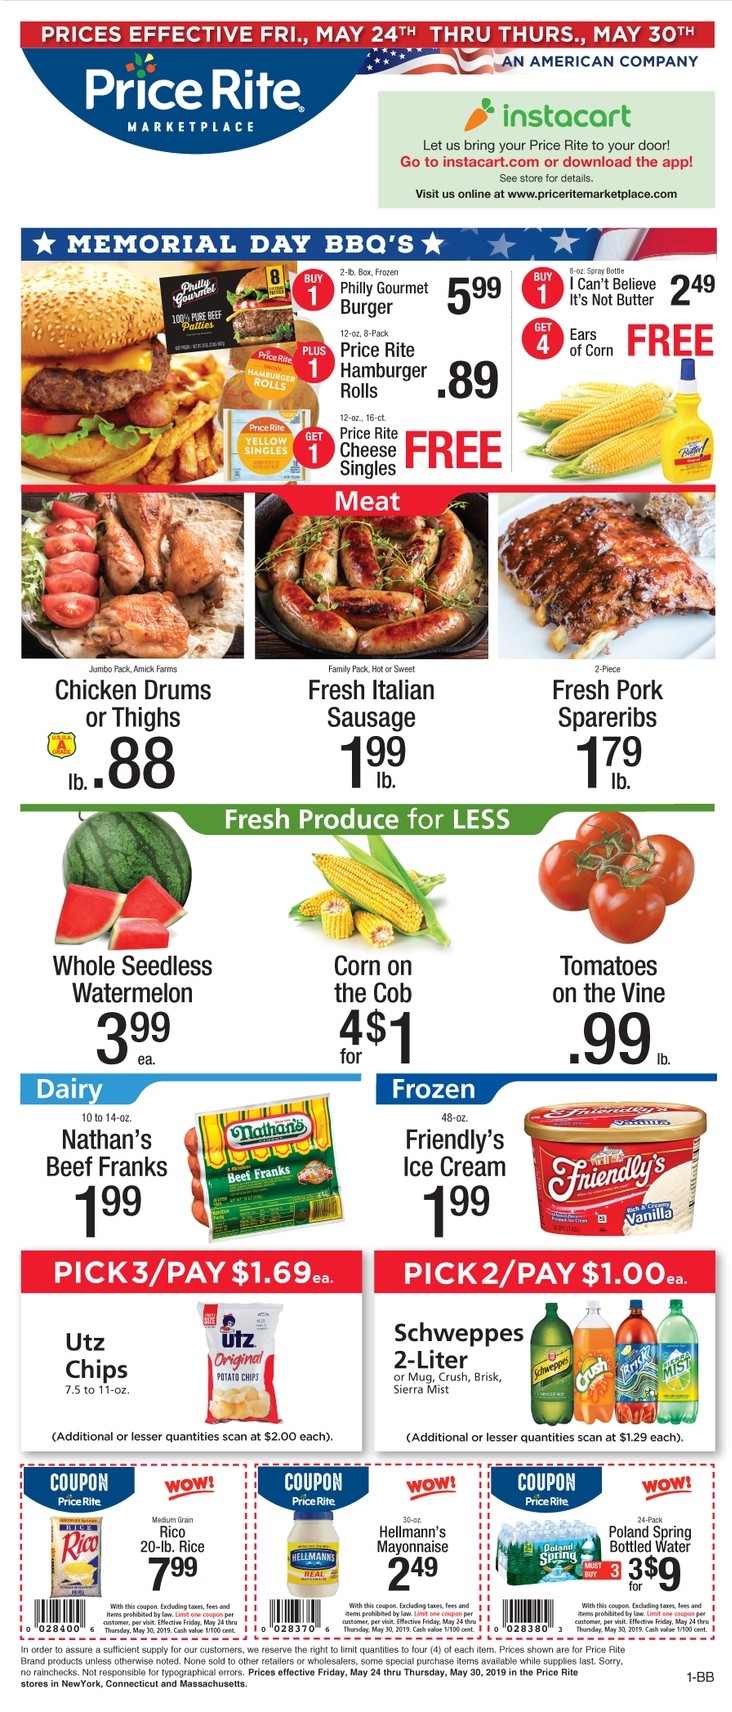 Price Rite Weekly Ad from May 24